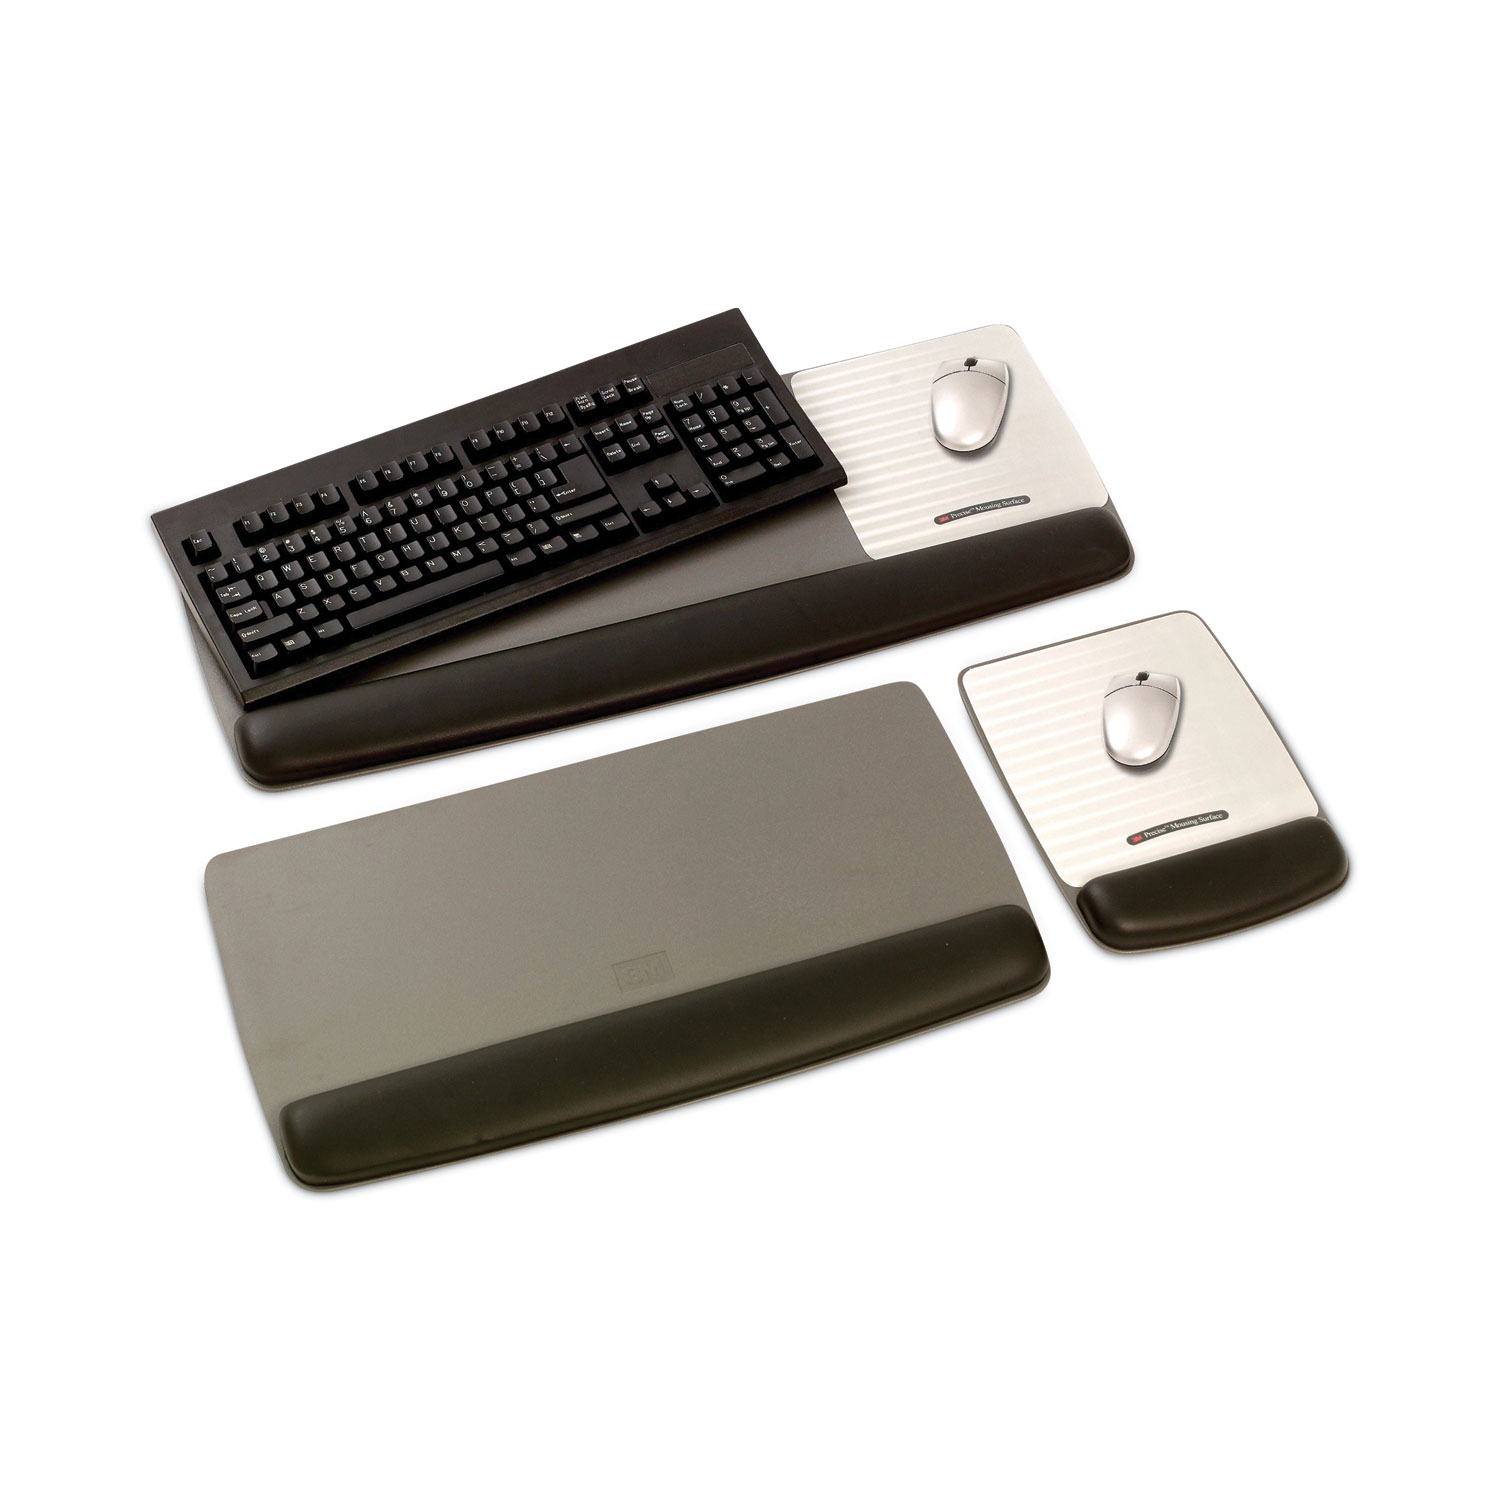 3M™ Gel Wrist Rest for Keyboard with Leatherette Cover and